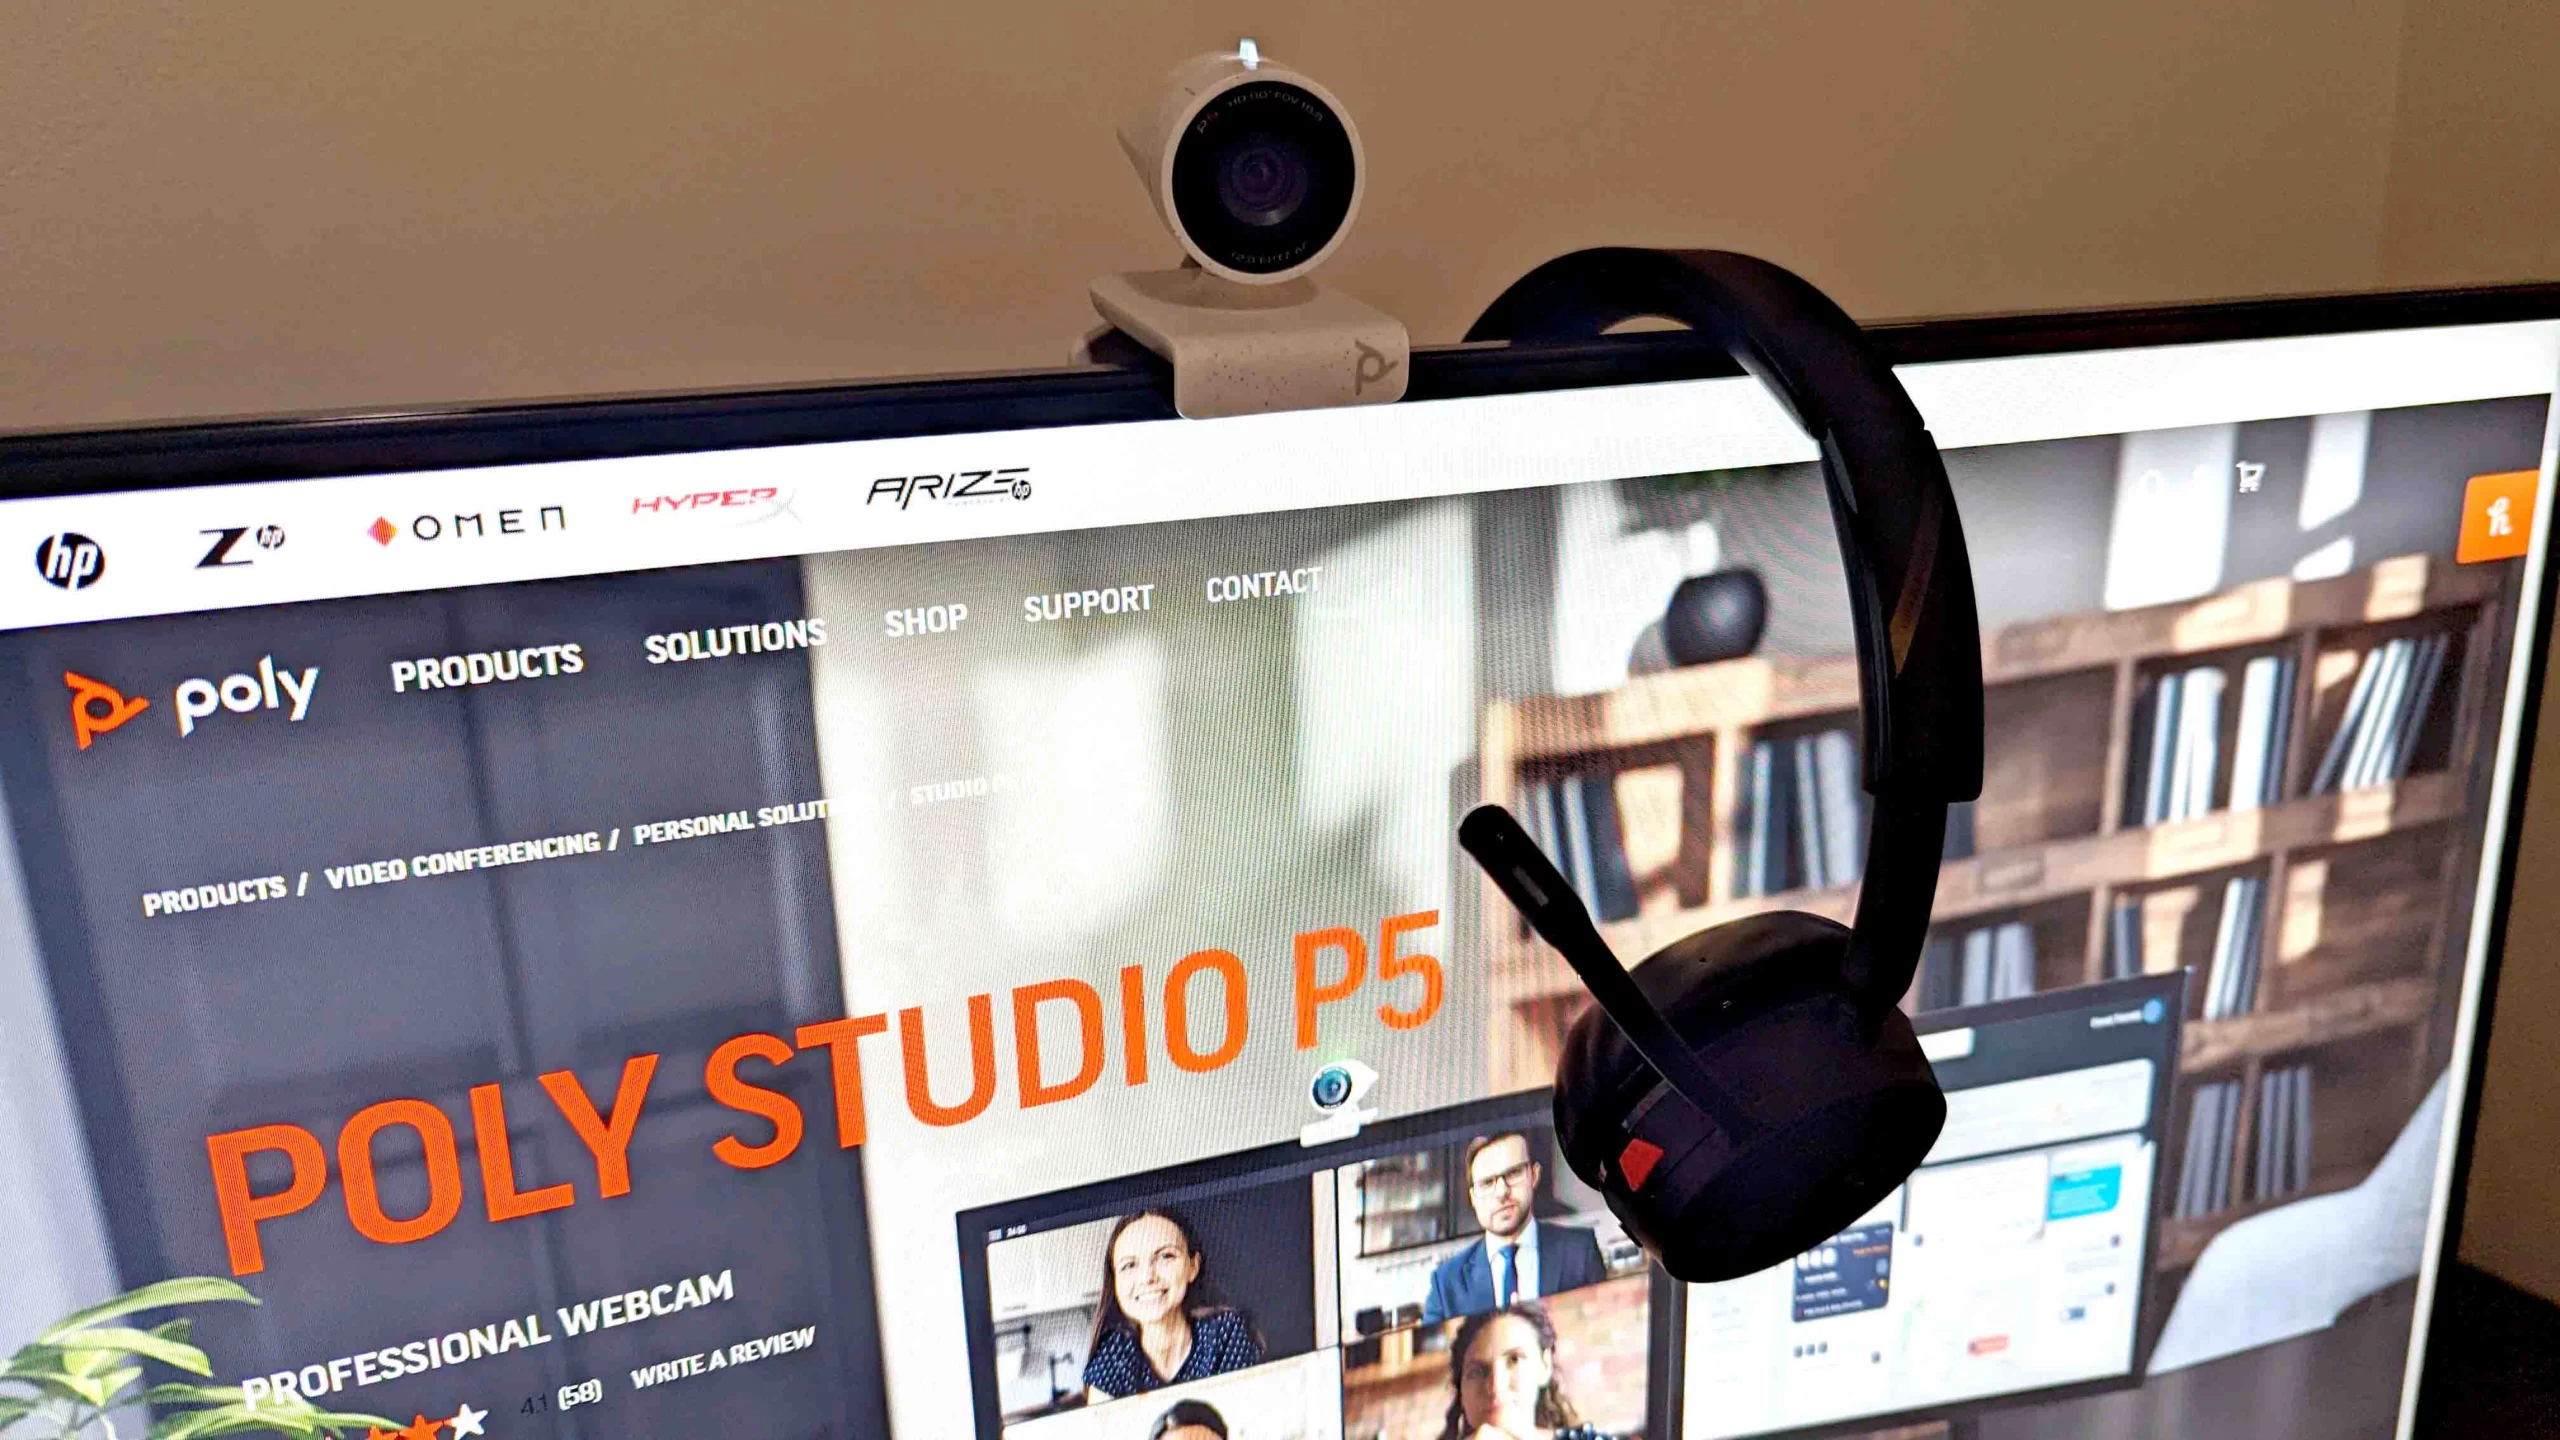 Poly Studio P5 Webcam and Voyager 4220 UC headset review 